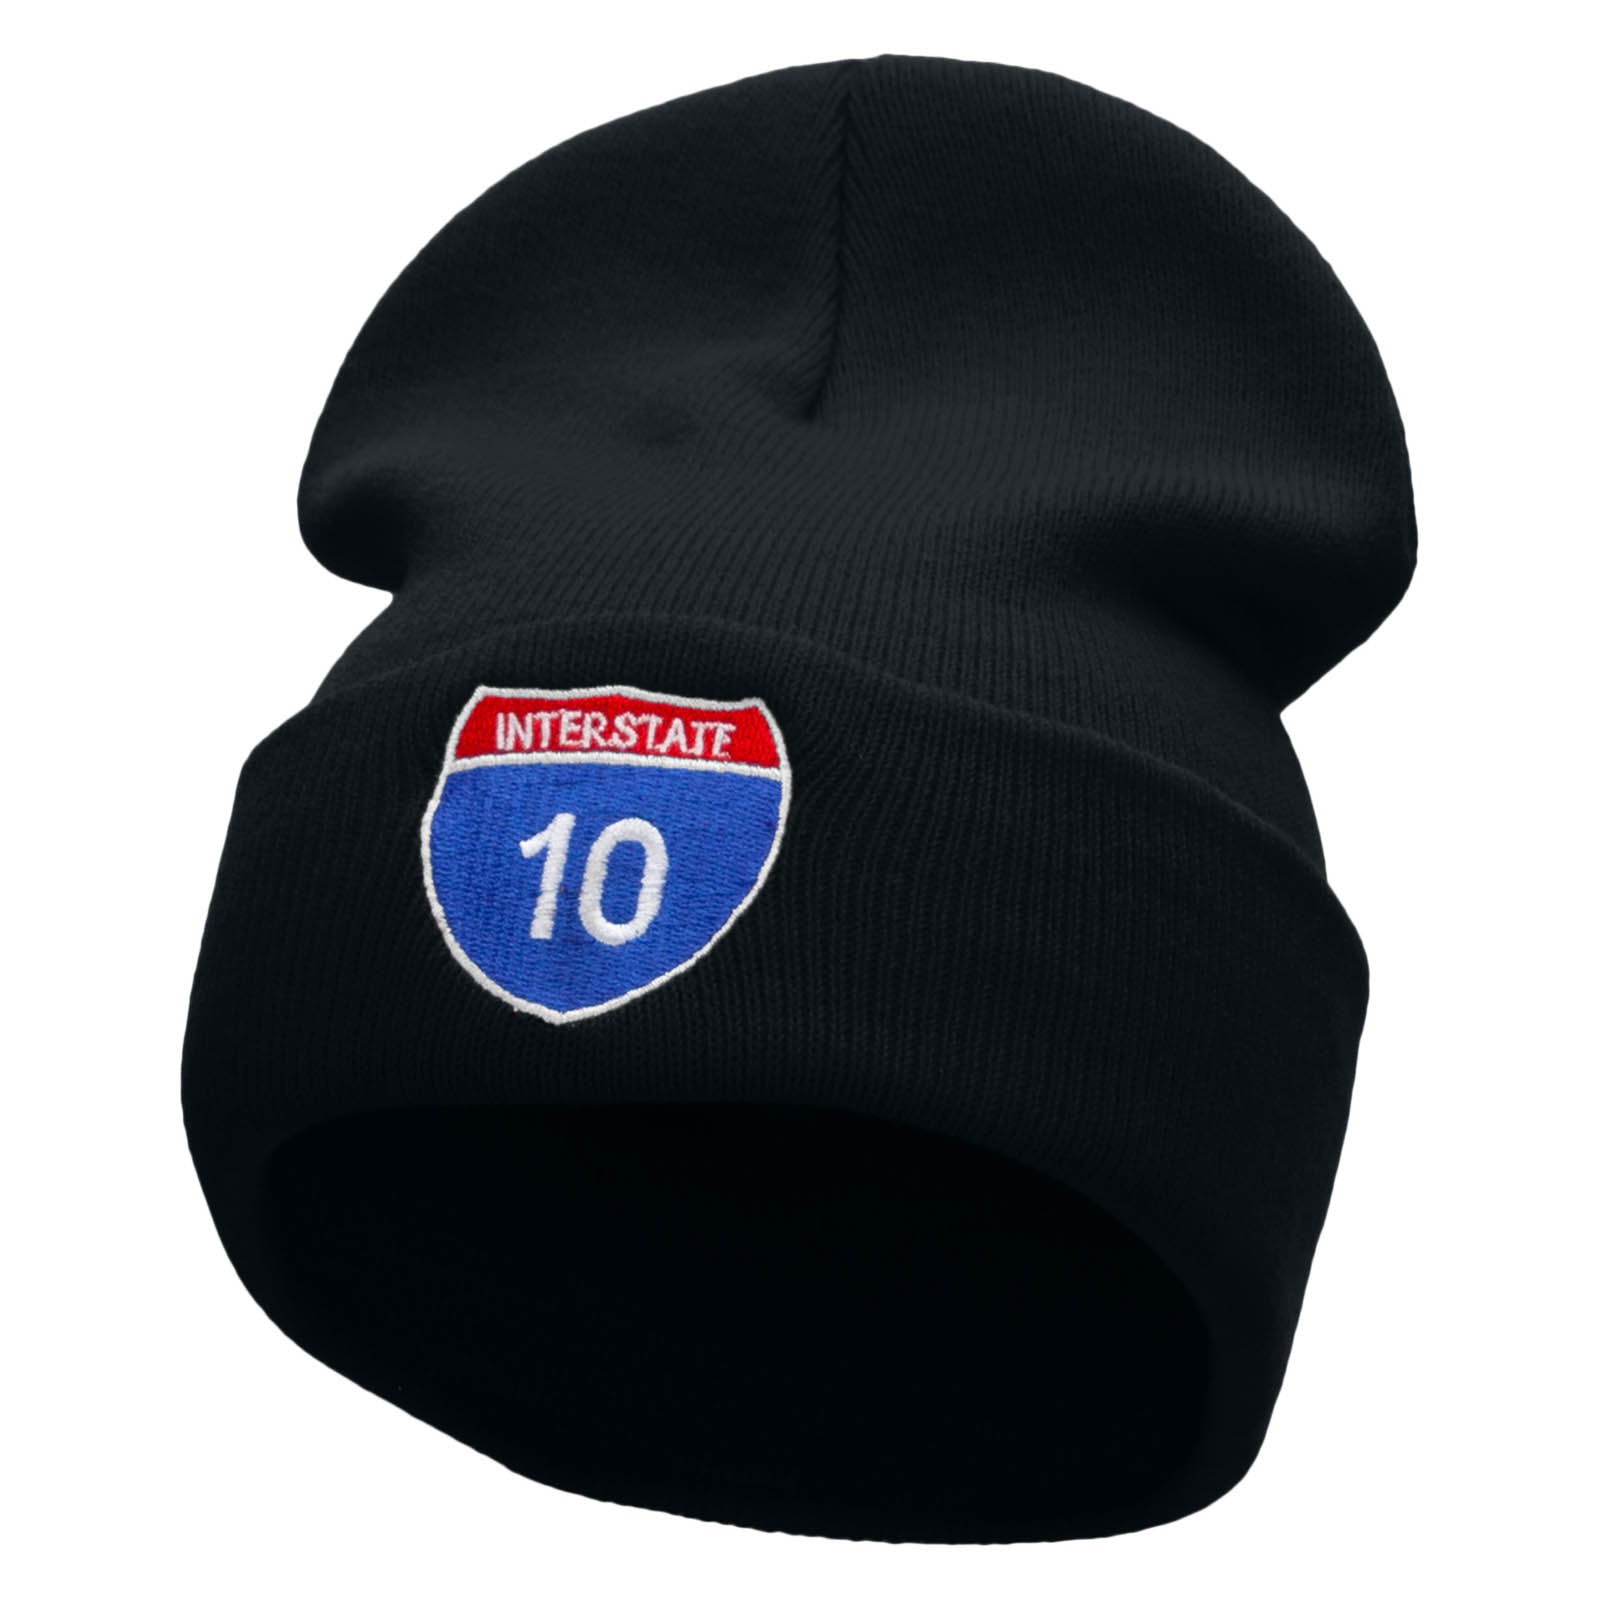 Interstate 10 Sign Embroidered 12 Inch Long Knitted Beanie - Navy OSFM